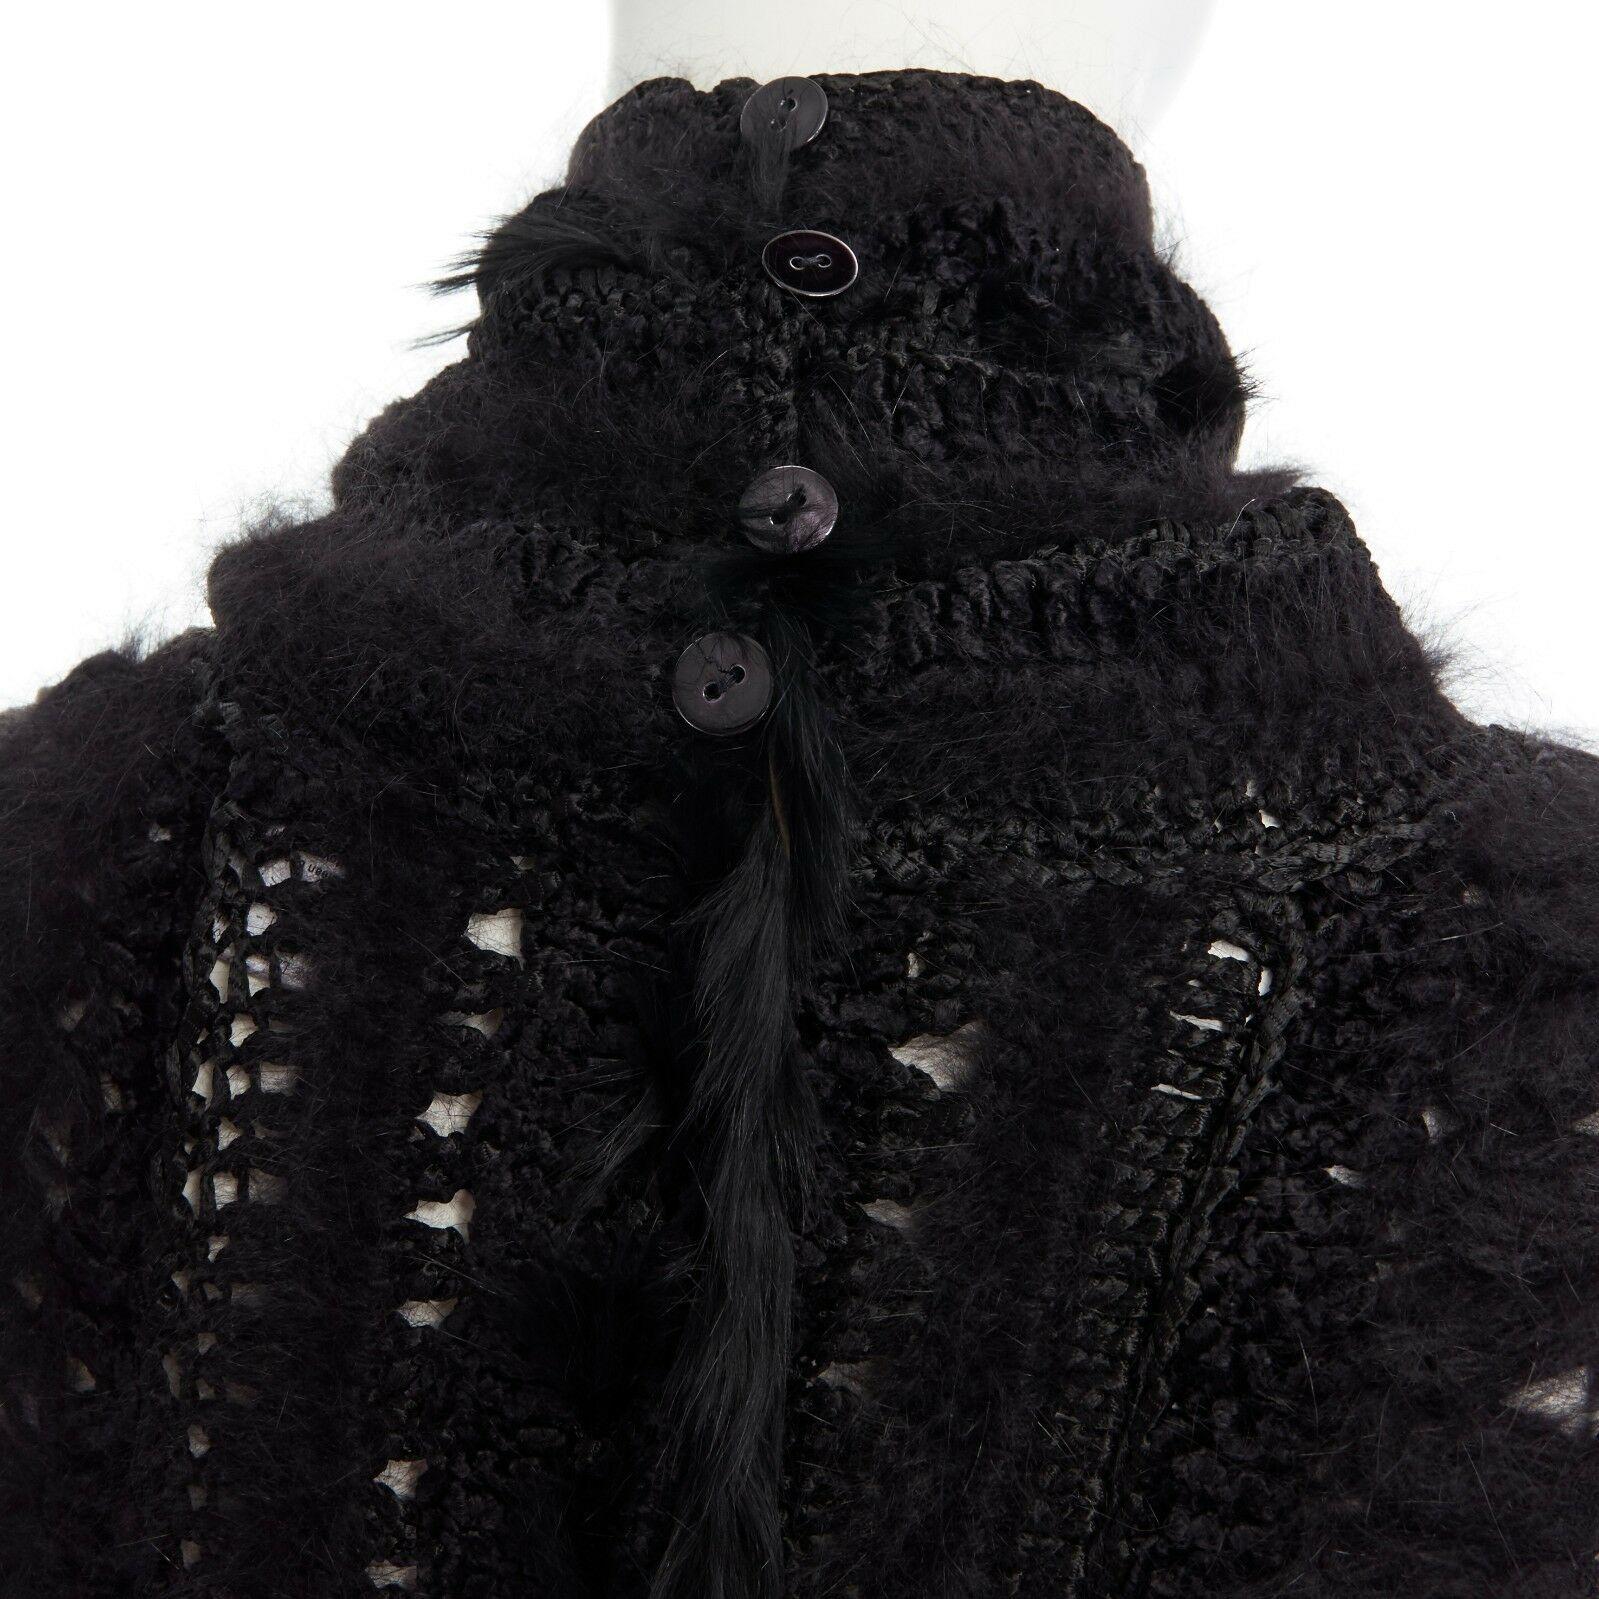 CHRISTIAN DIOR GALLIANO black wool sheer lace fur trimmed crochet knit swaeter L
CHRISTIAN DIOR BY JOHN GALLIANO
Black. 
Knitted. 
Mixed fabric. 
Crochet knit with various fabrics. 
Floral lace and rabbit fur insert. 
Stand funnel collar. 
Button